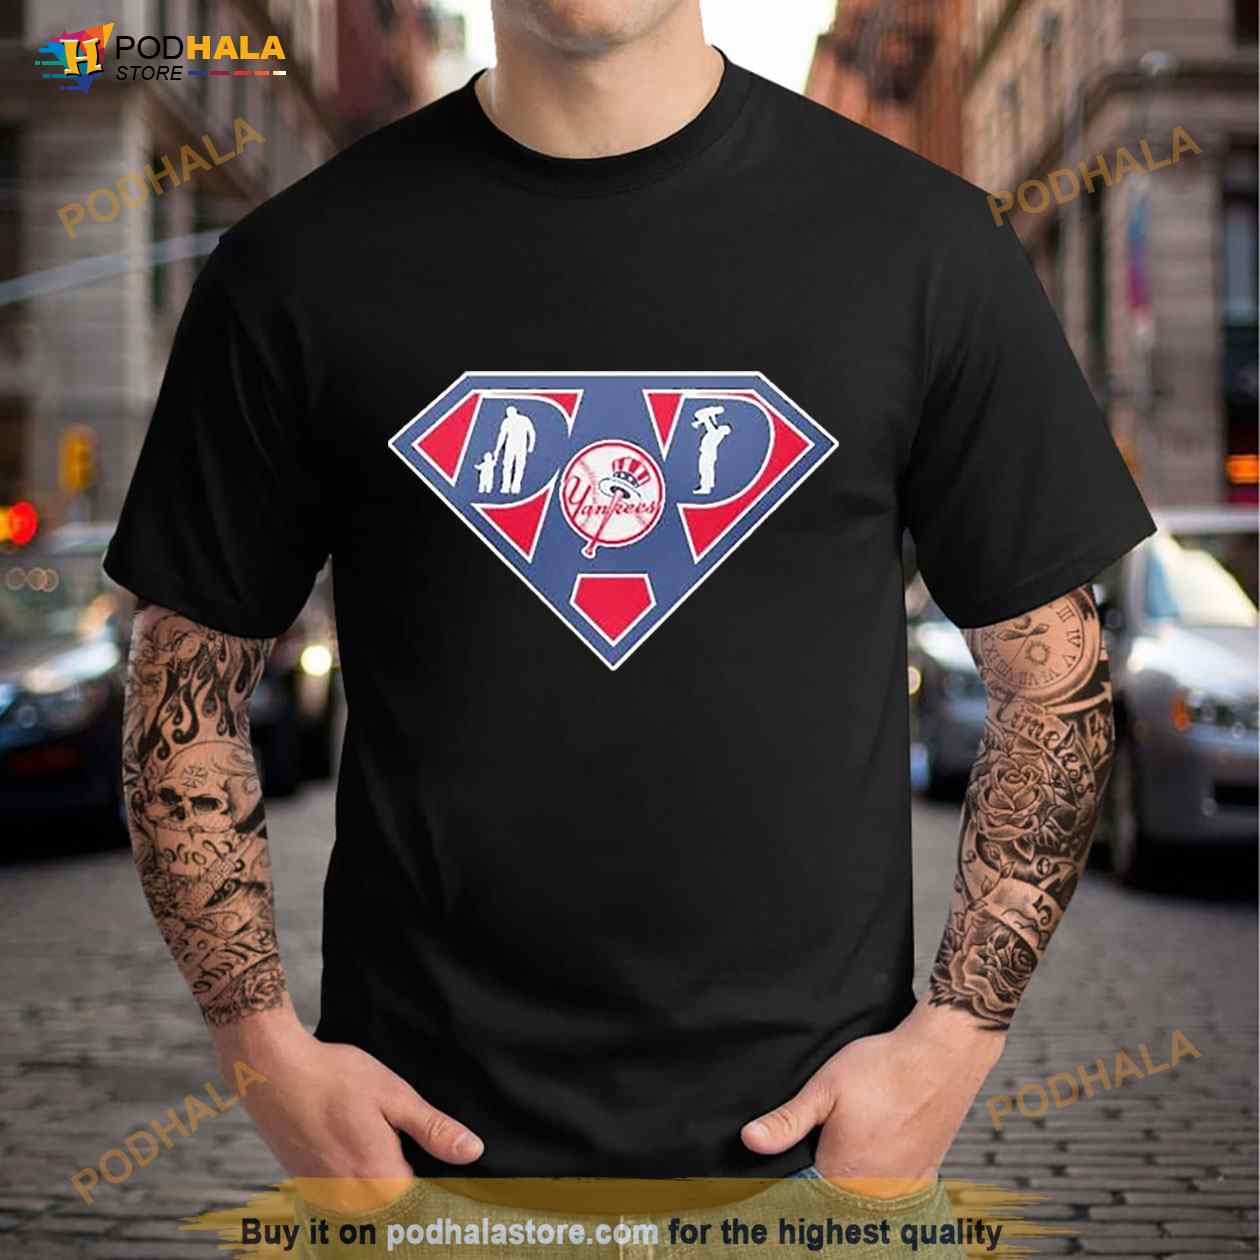 New York Yankees Super Dad Shirt - Bring Your Ideas, Thoughts And